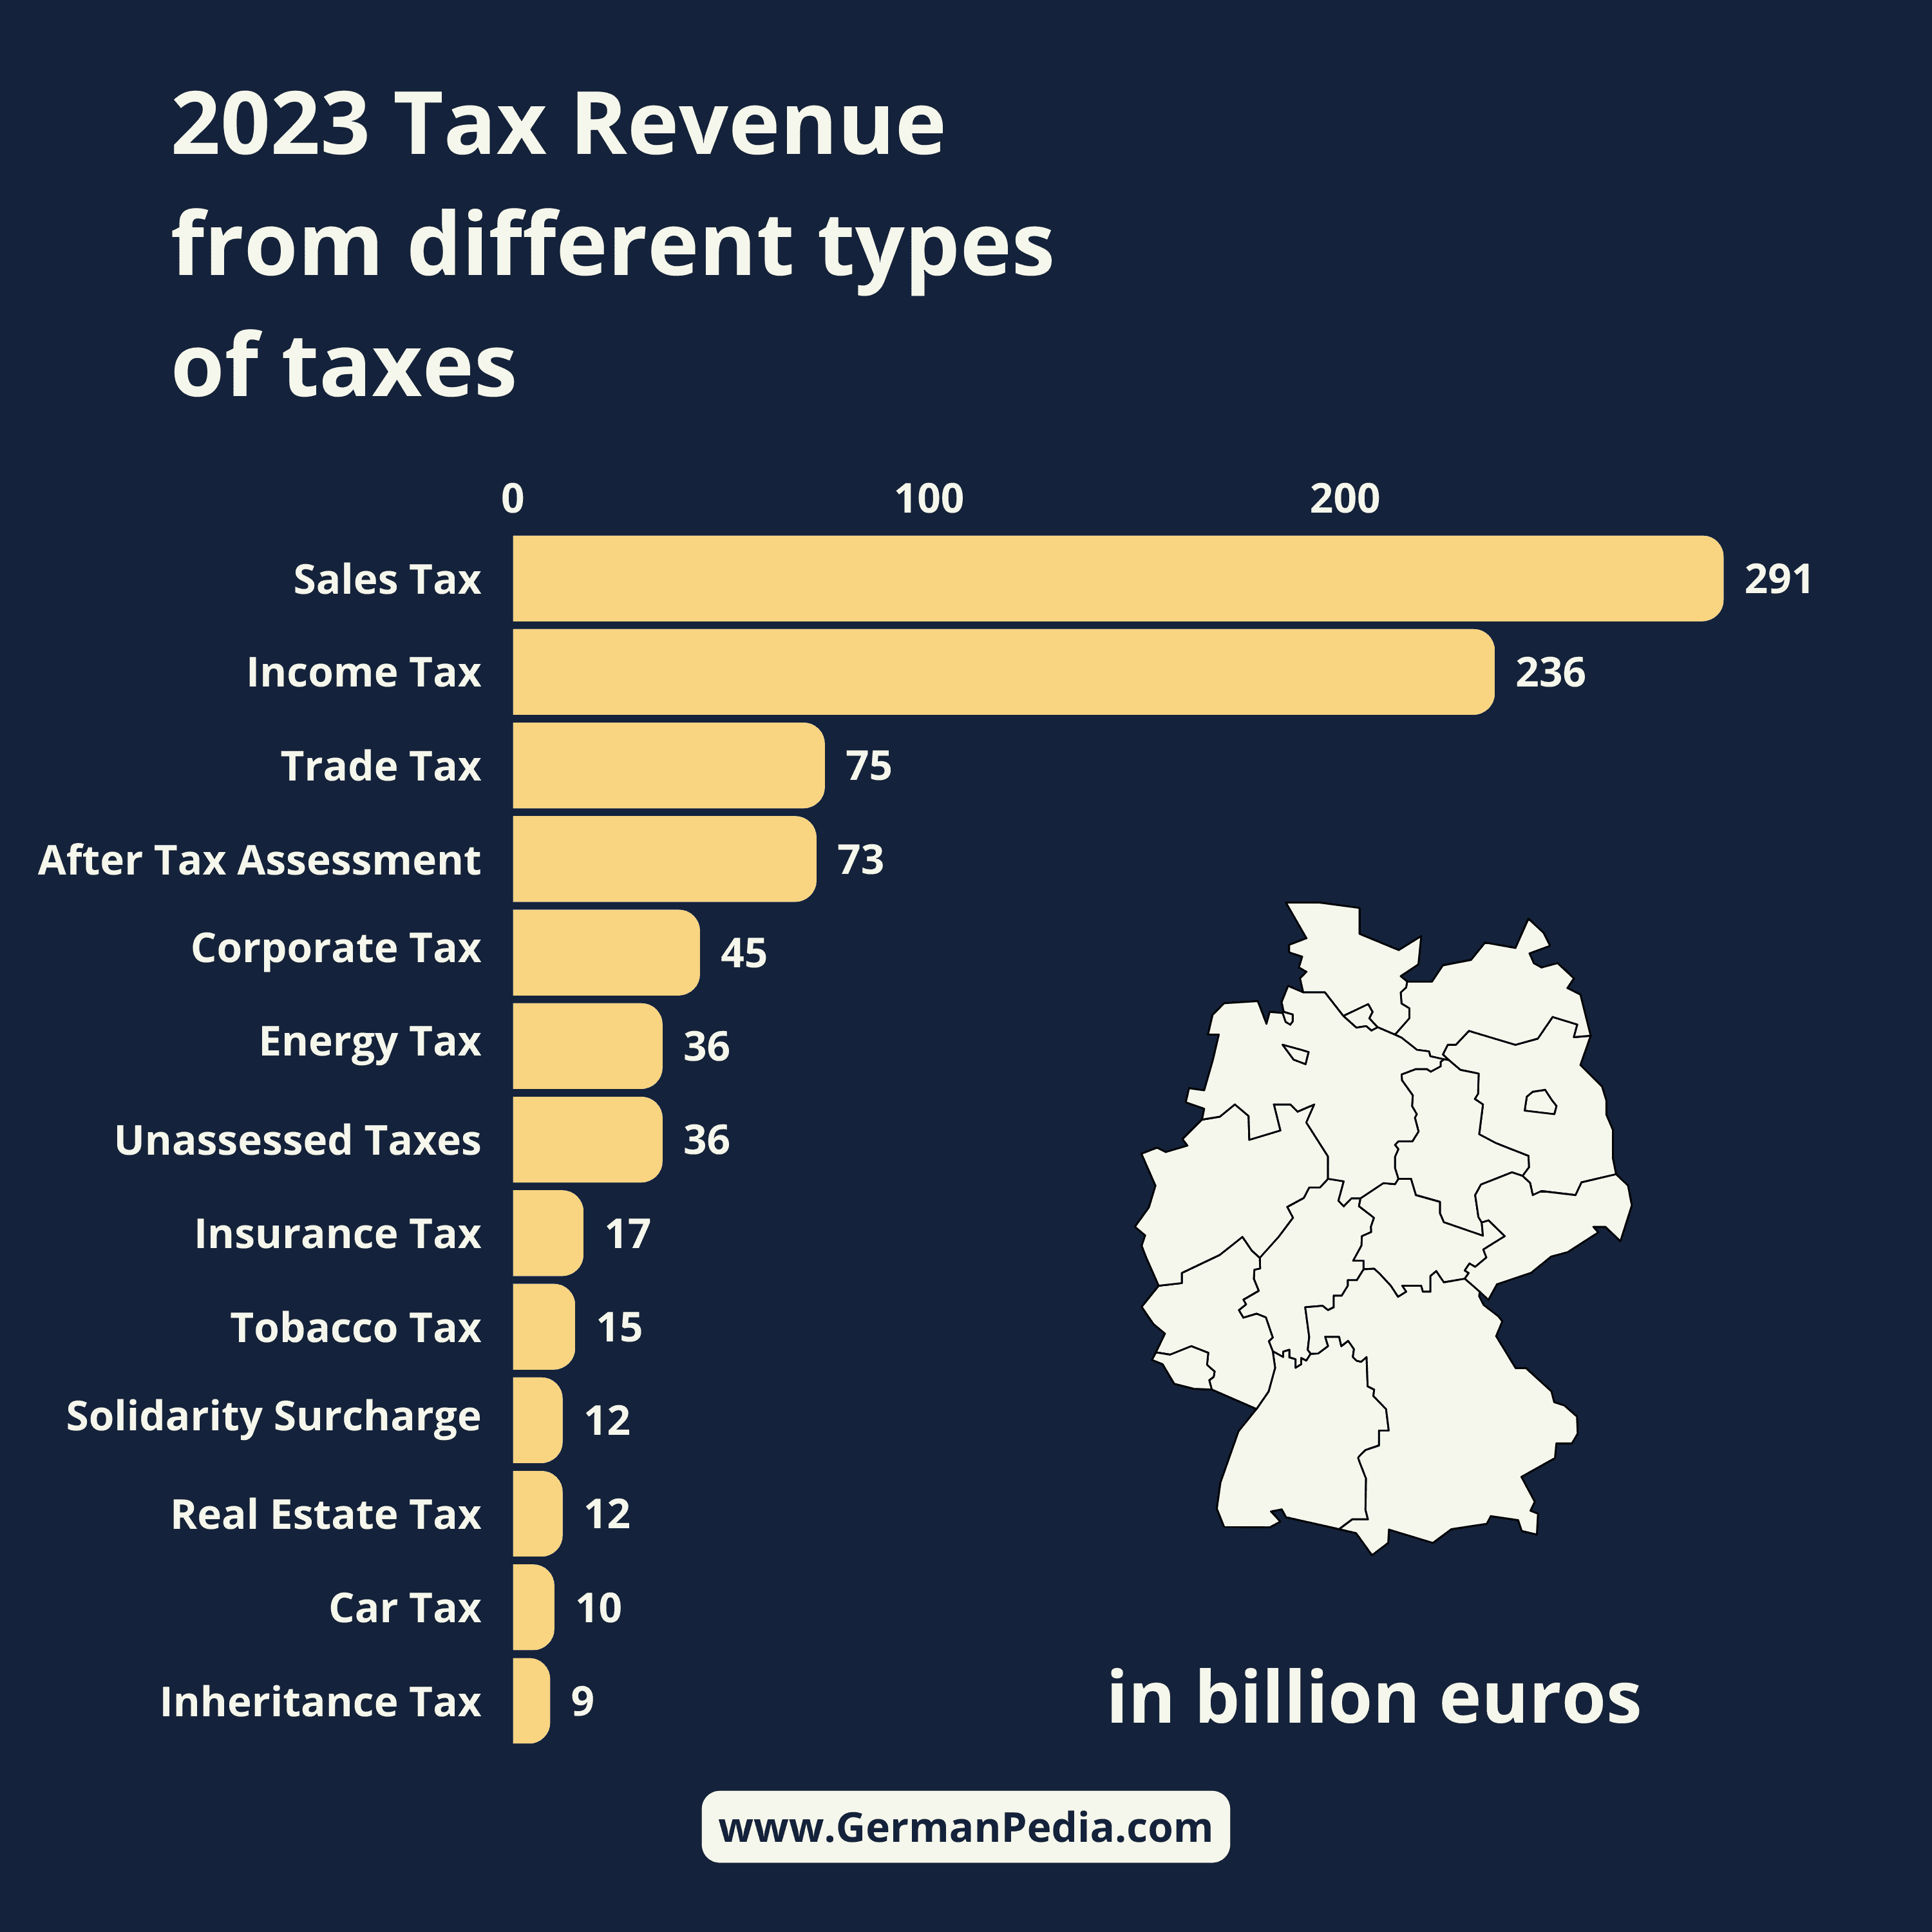 Germany's tax revenue from different taxes